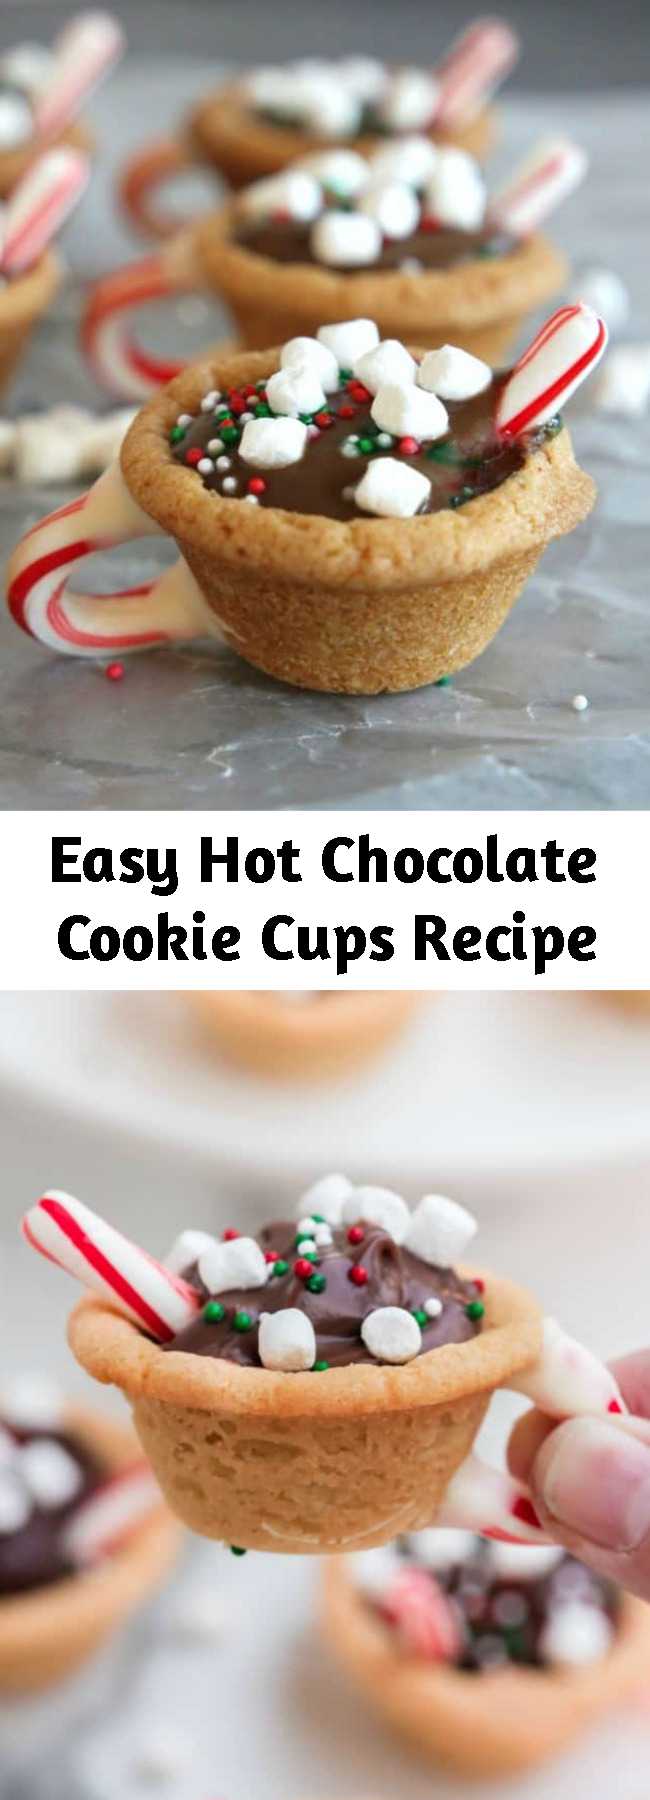 Easy Hot Chocolate Cookie Cups Recipe - These Hot Chocolate Cookie Cups are made with ready to bake sugar cookie dough and pudding cups! So easy to make and they are a super fun holiday dessert and are perfect for Christmas parties, cookie exchanges or just to put a smile on someone’s face!